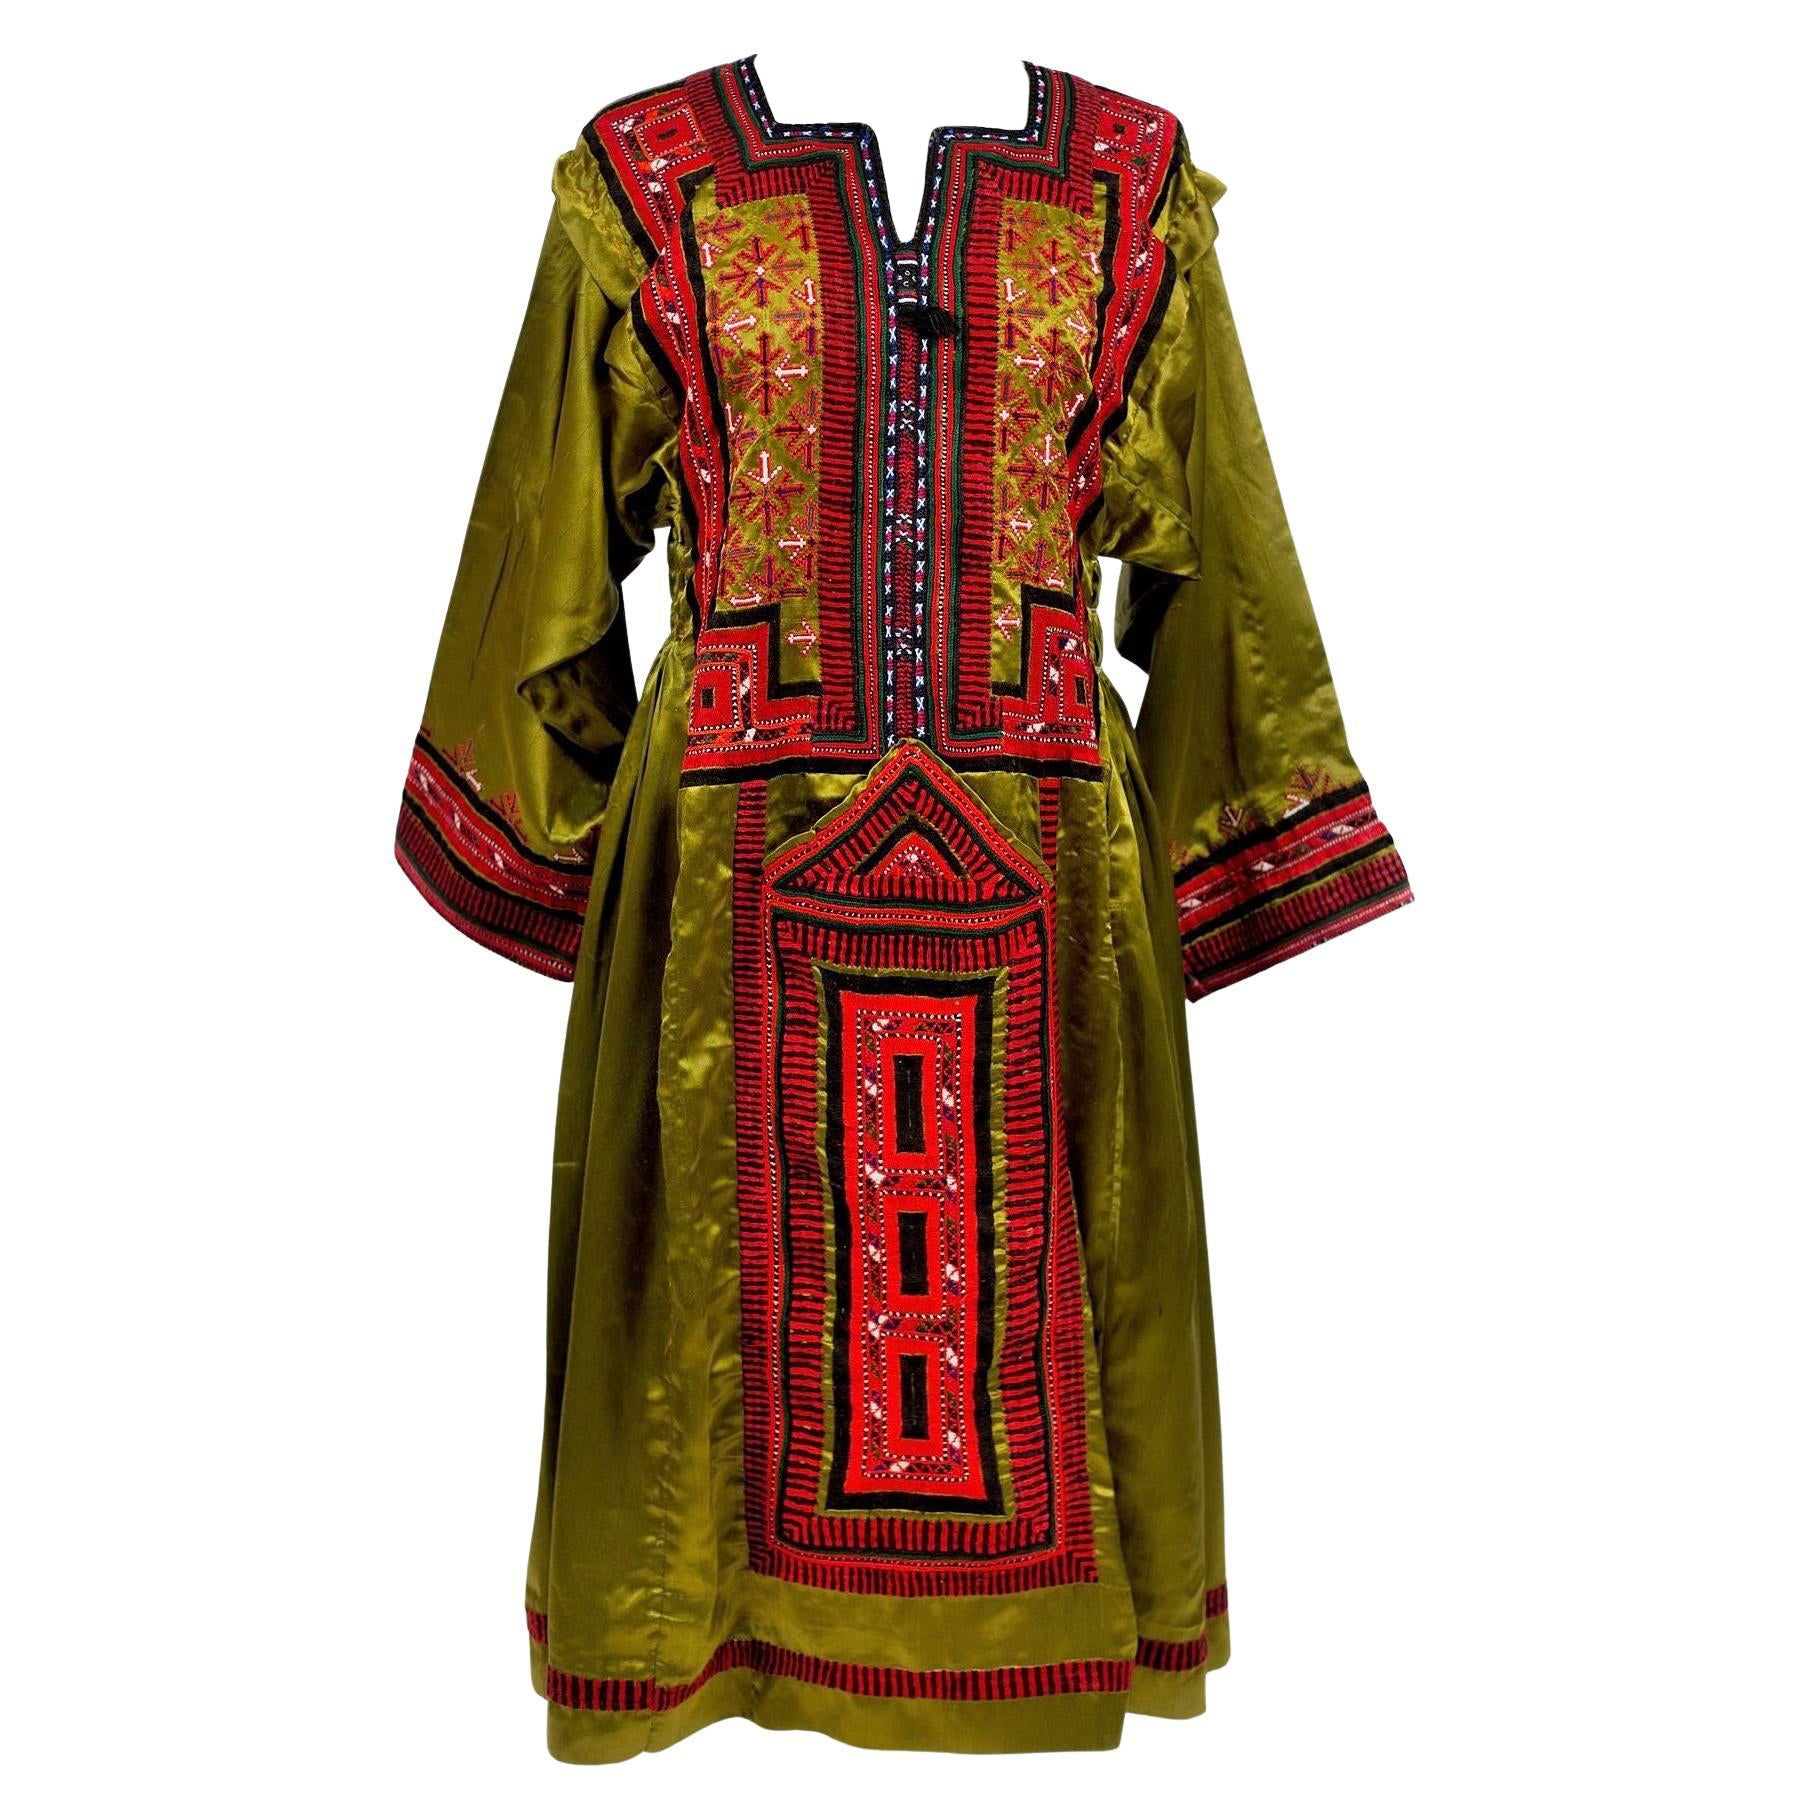 An Ethnic Bronze Satin Blouse Embroidered Dress - India Circa 1970 For Sale